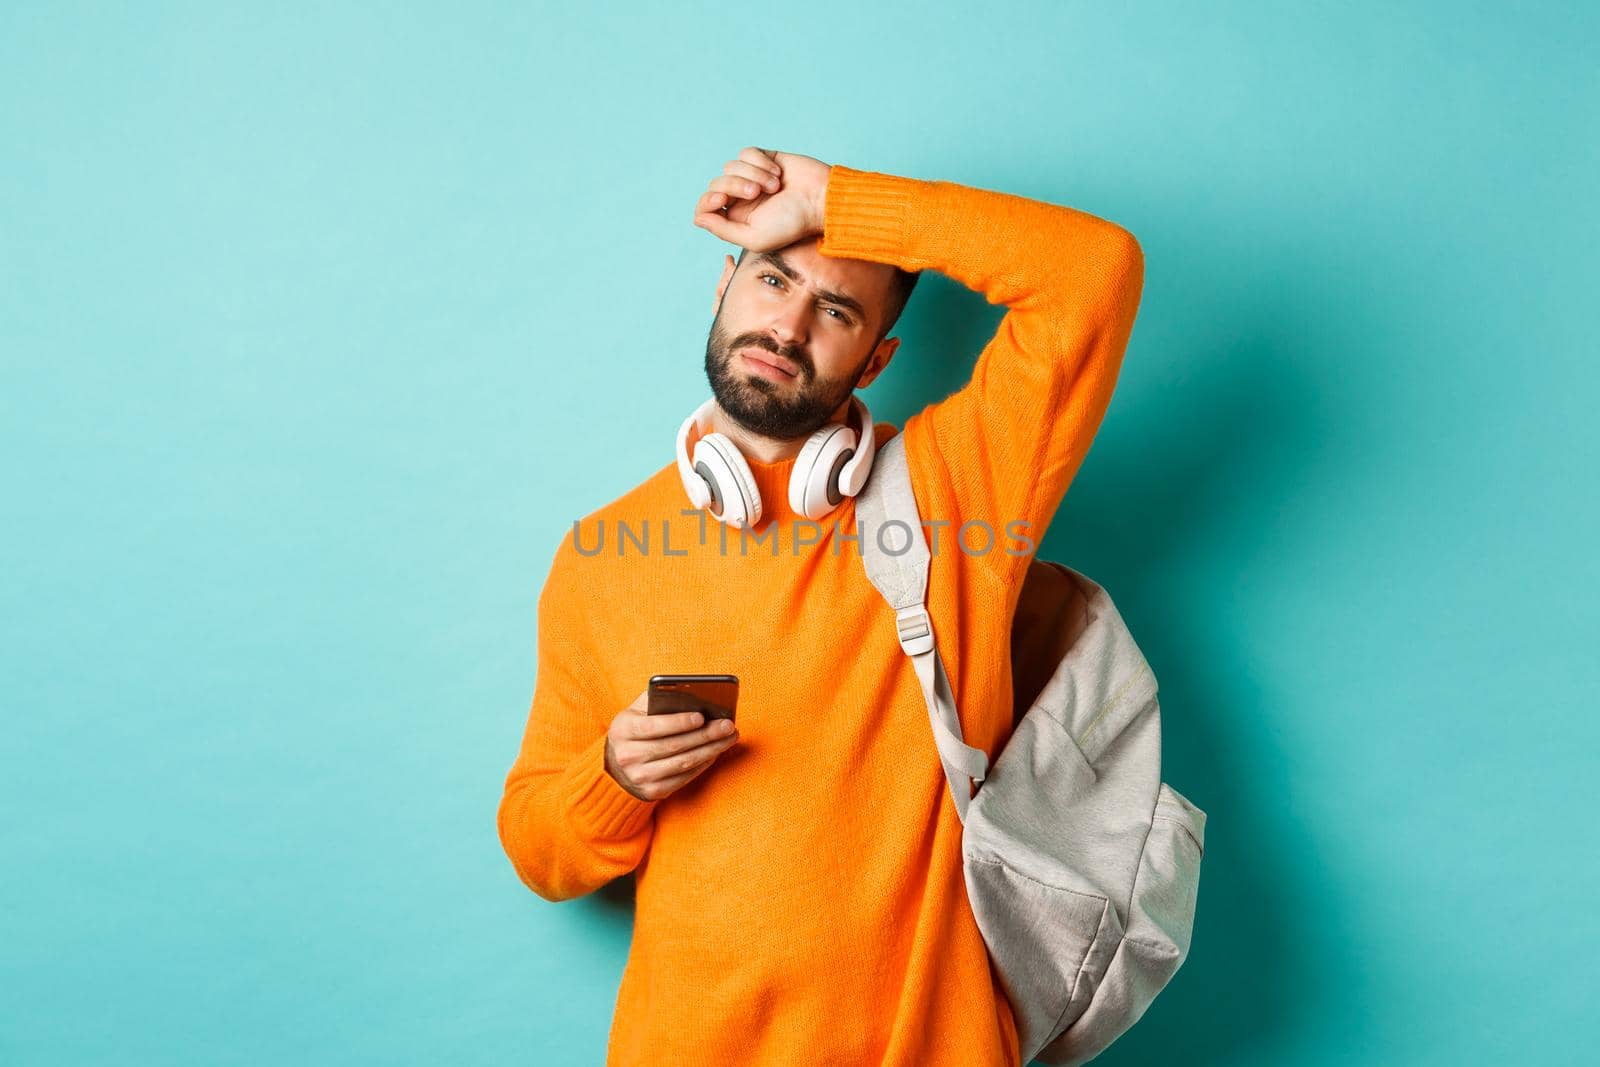 Tired guy with headphones and backpack, wiping sweat off forehead with exhausted face, using mobile phone, standing over turquoise background.